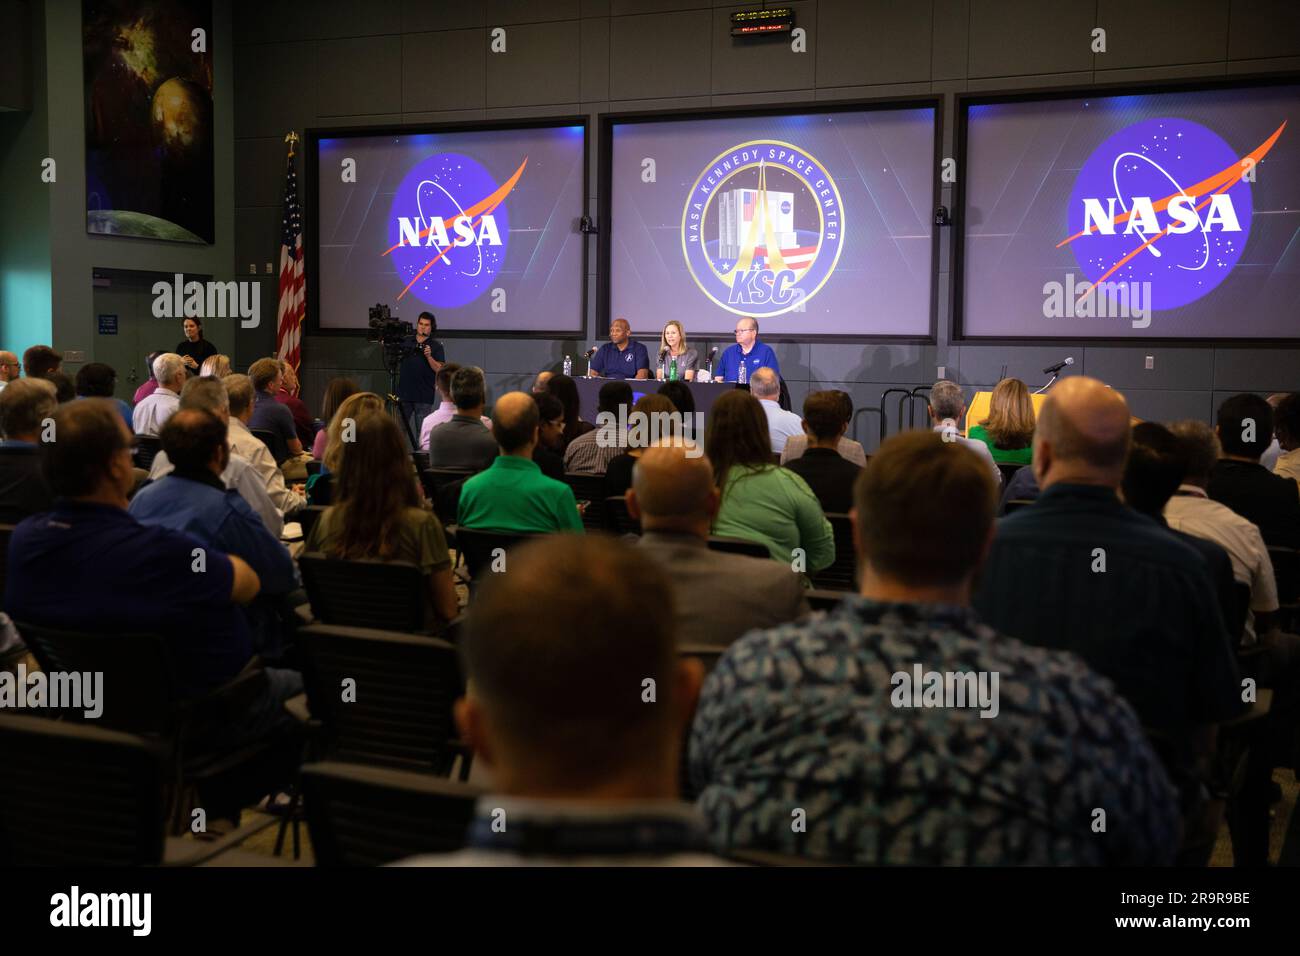 KSC Town Hall. From left, NASA’s Kennedy Space Center Deputy Director Kelvin Manning, Director Janet Petro, and Associate Director, Management Burt Summerfield participate in an employee Town Hall event at the Florida spaceport on March 13, 2023. The senior leaders discussed key accomplishments and goals of the center, as well as answered questions from the Kennedy workforce. Stock Photo